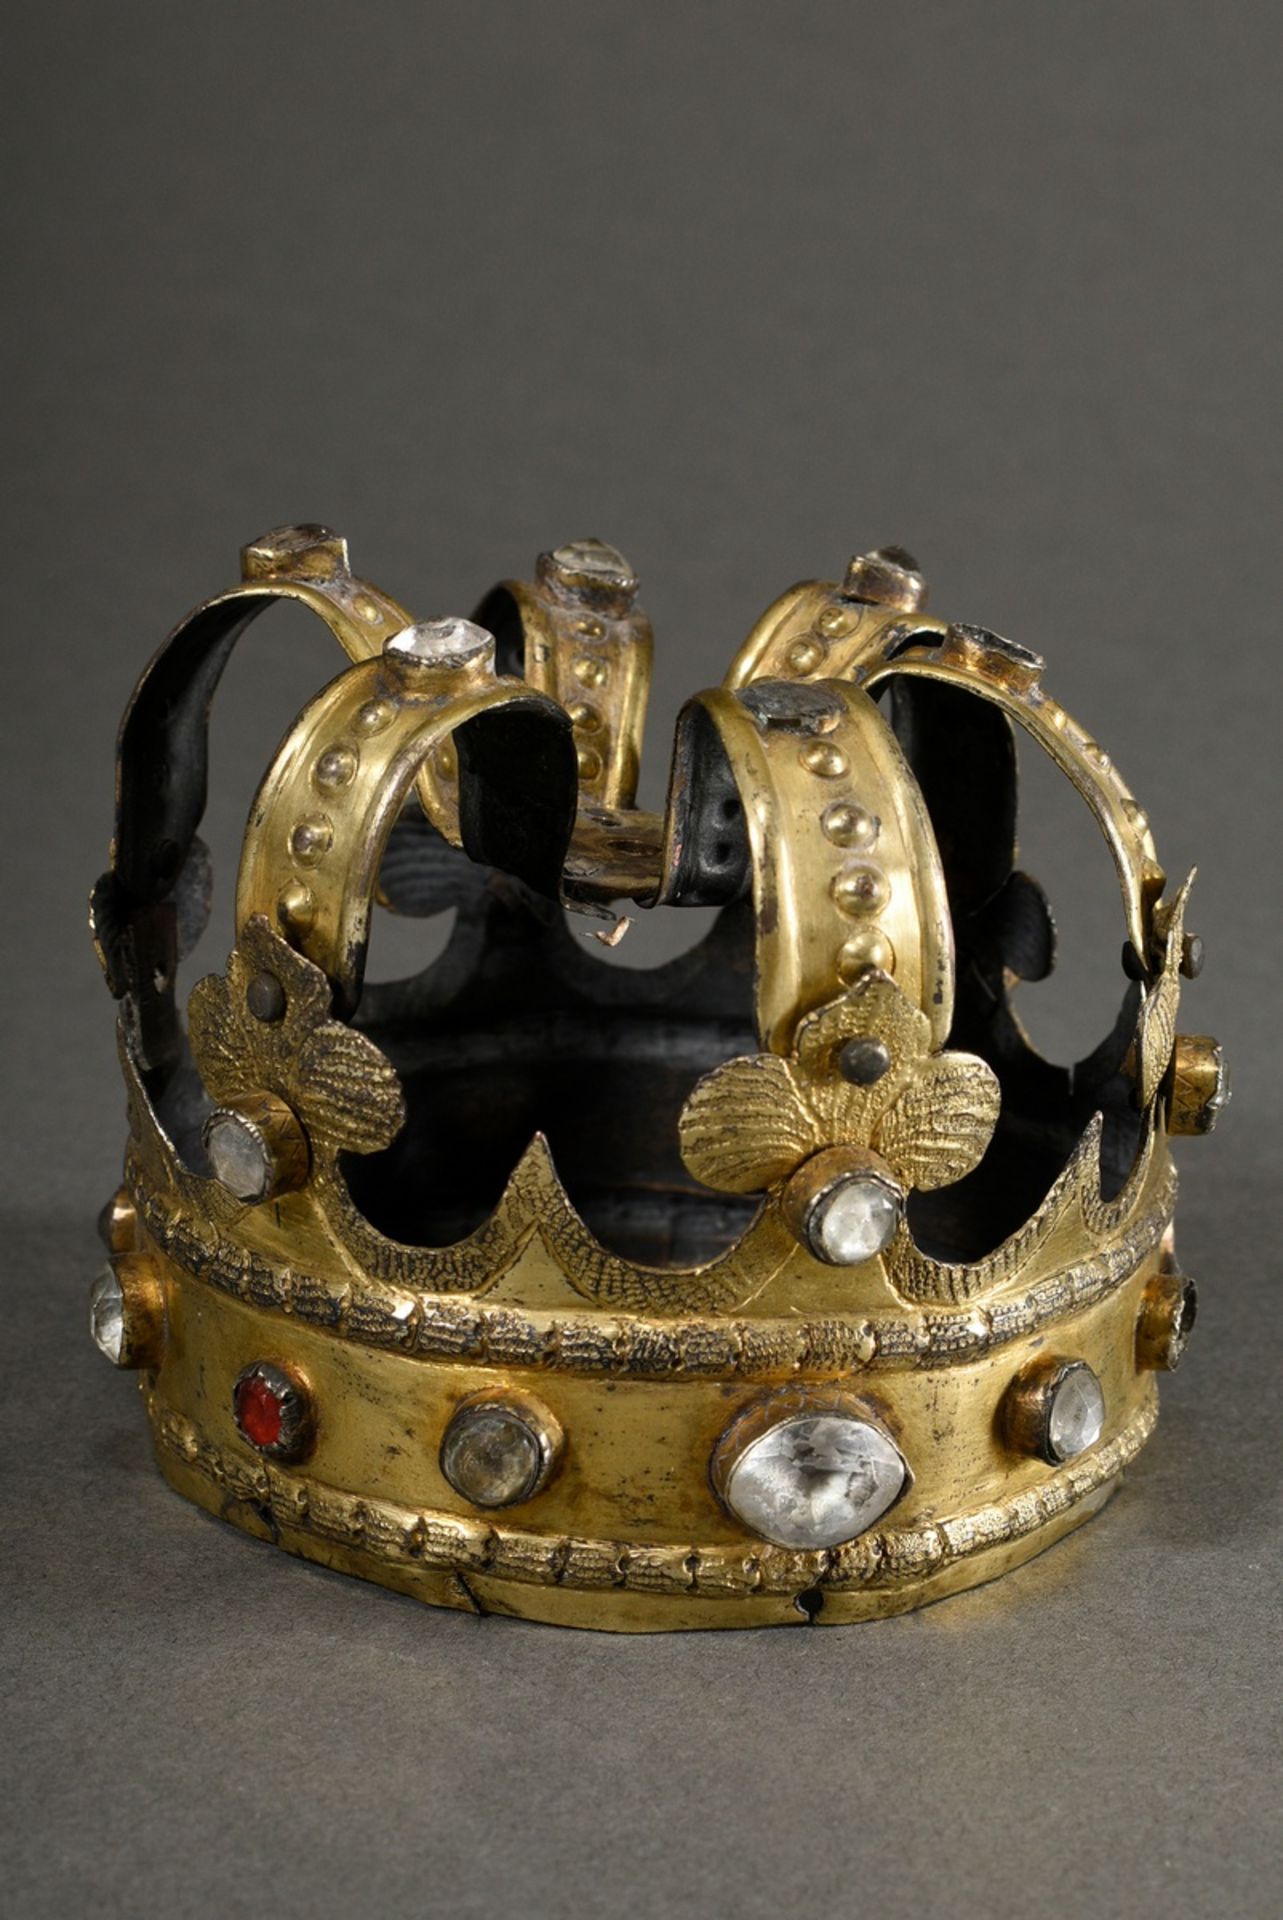 Antique crown of the Virgin Mary with glass stones, probably South German, 19th century, gilt metal - Image 2 of 9